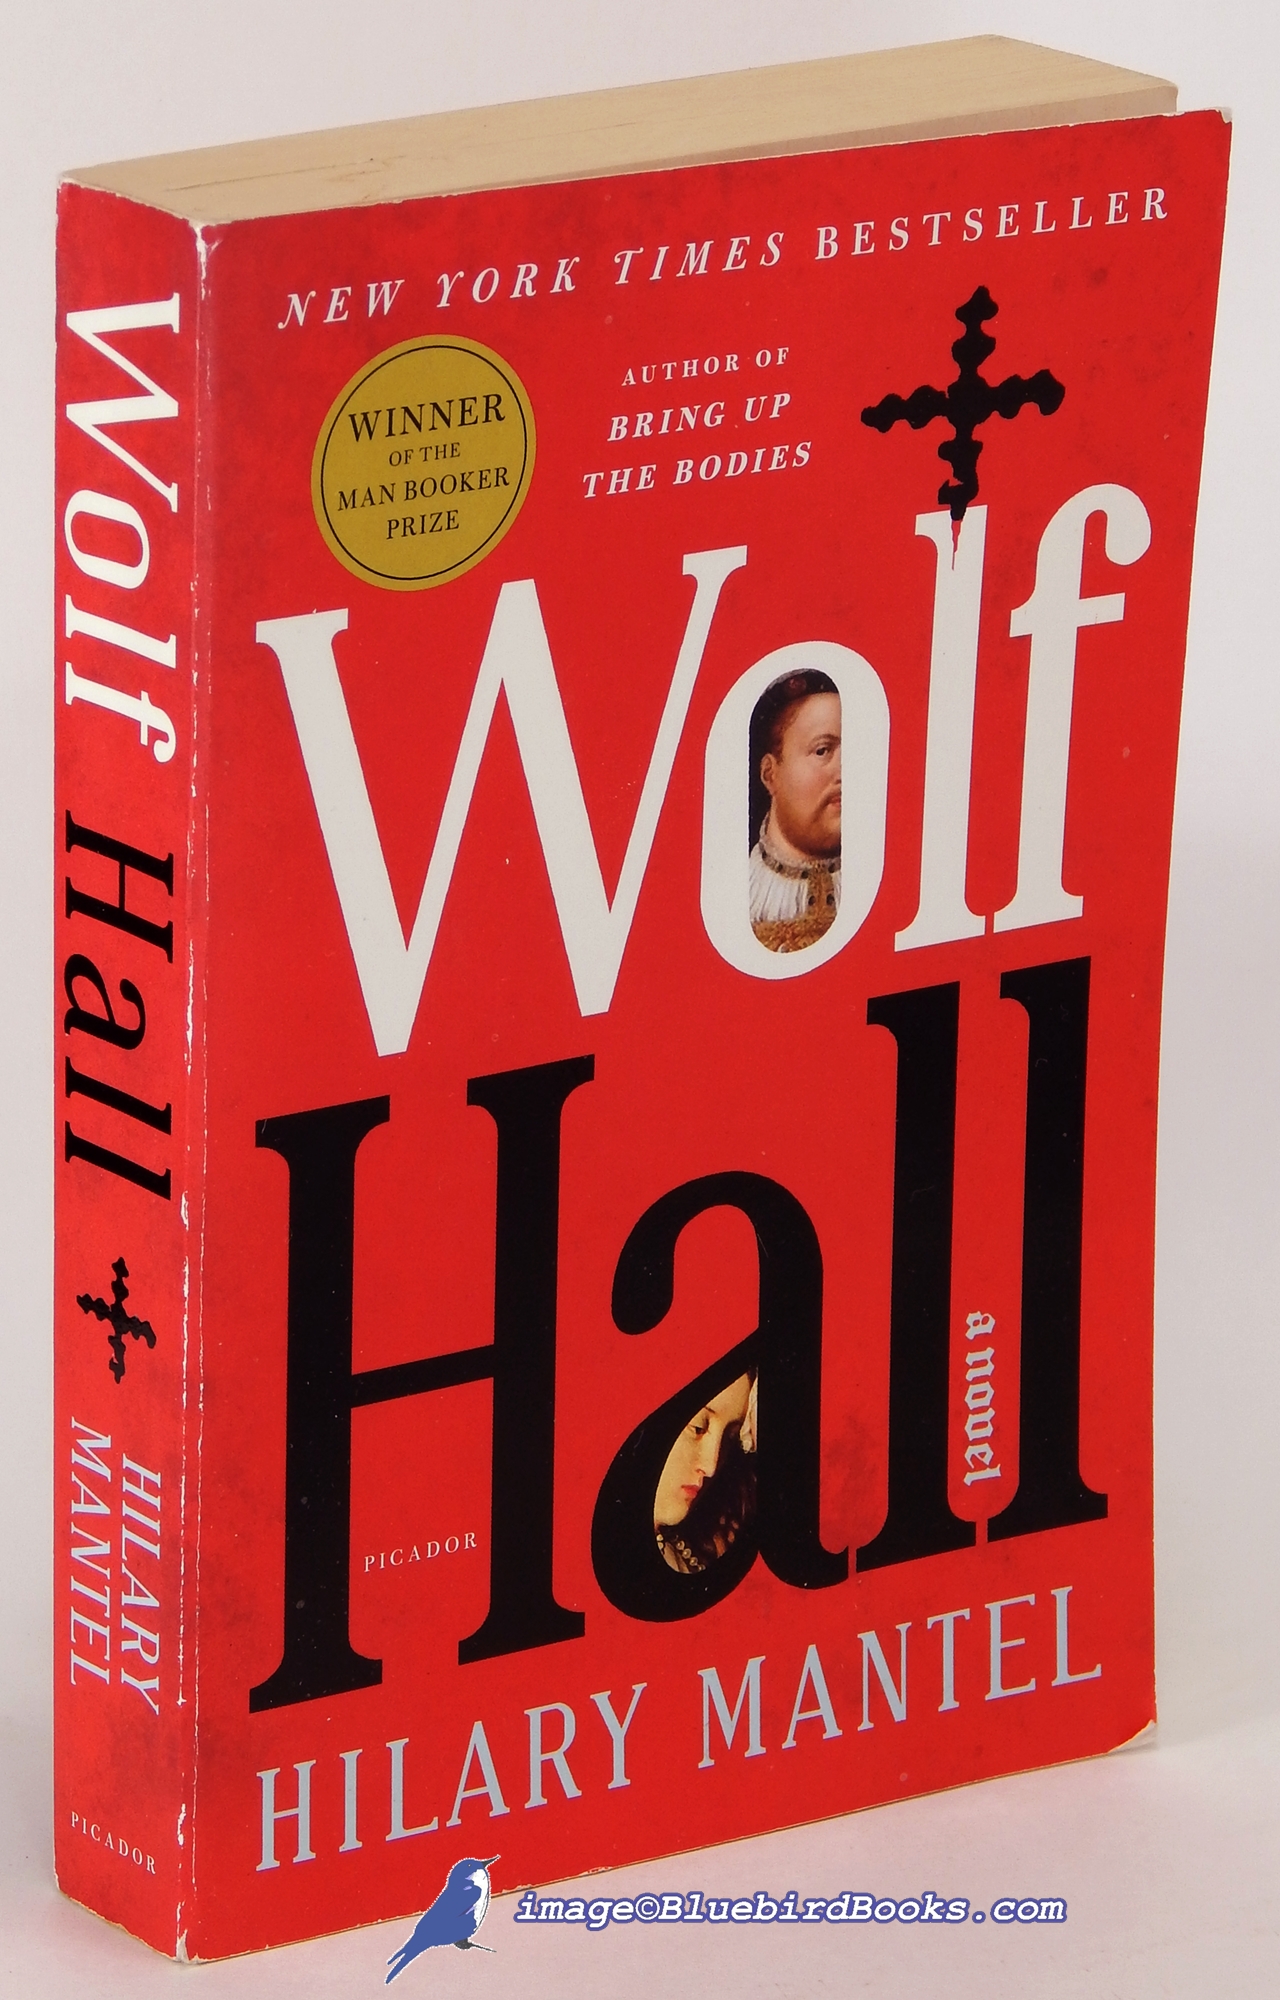 MANTEL, HILARY - Wolf Hall, a Novel: Book One of the Thomas Cromwell Trilogy